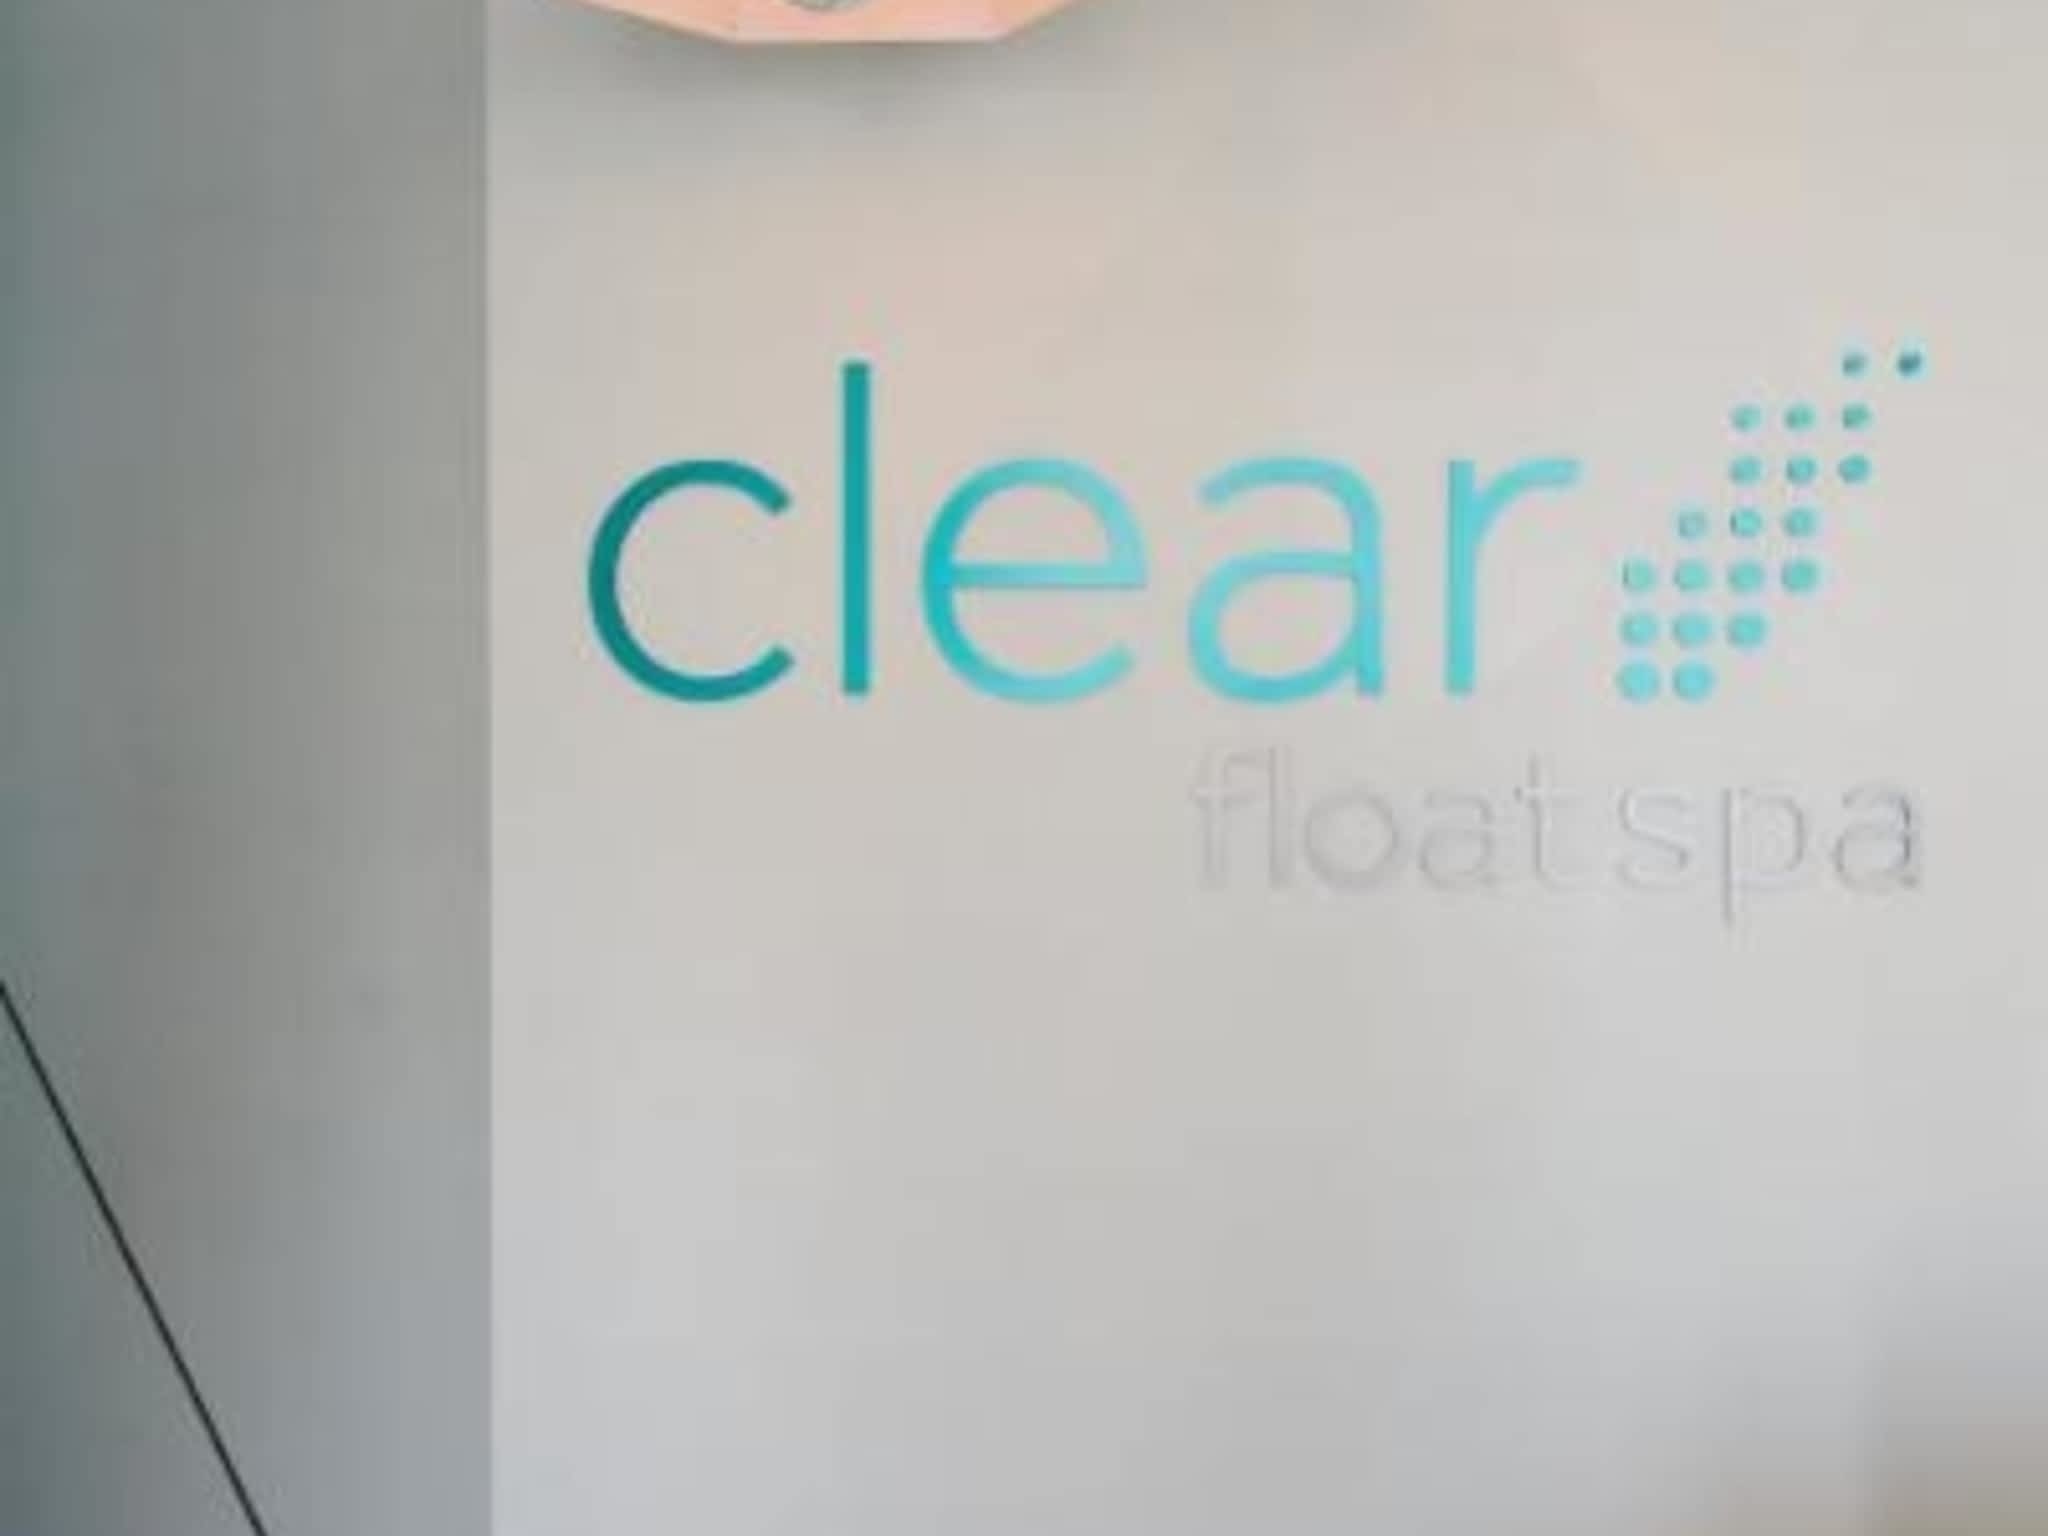 photo Clear float spa